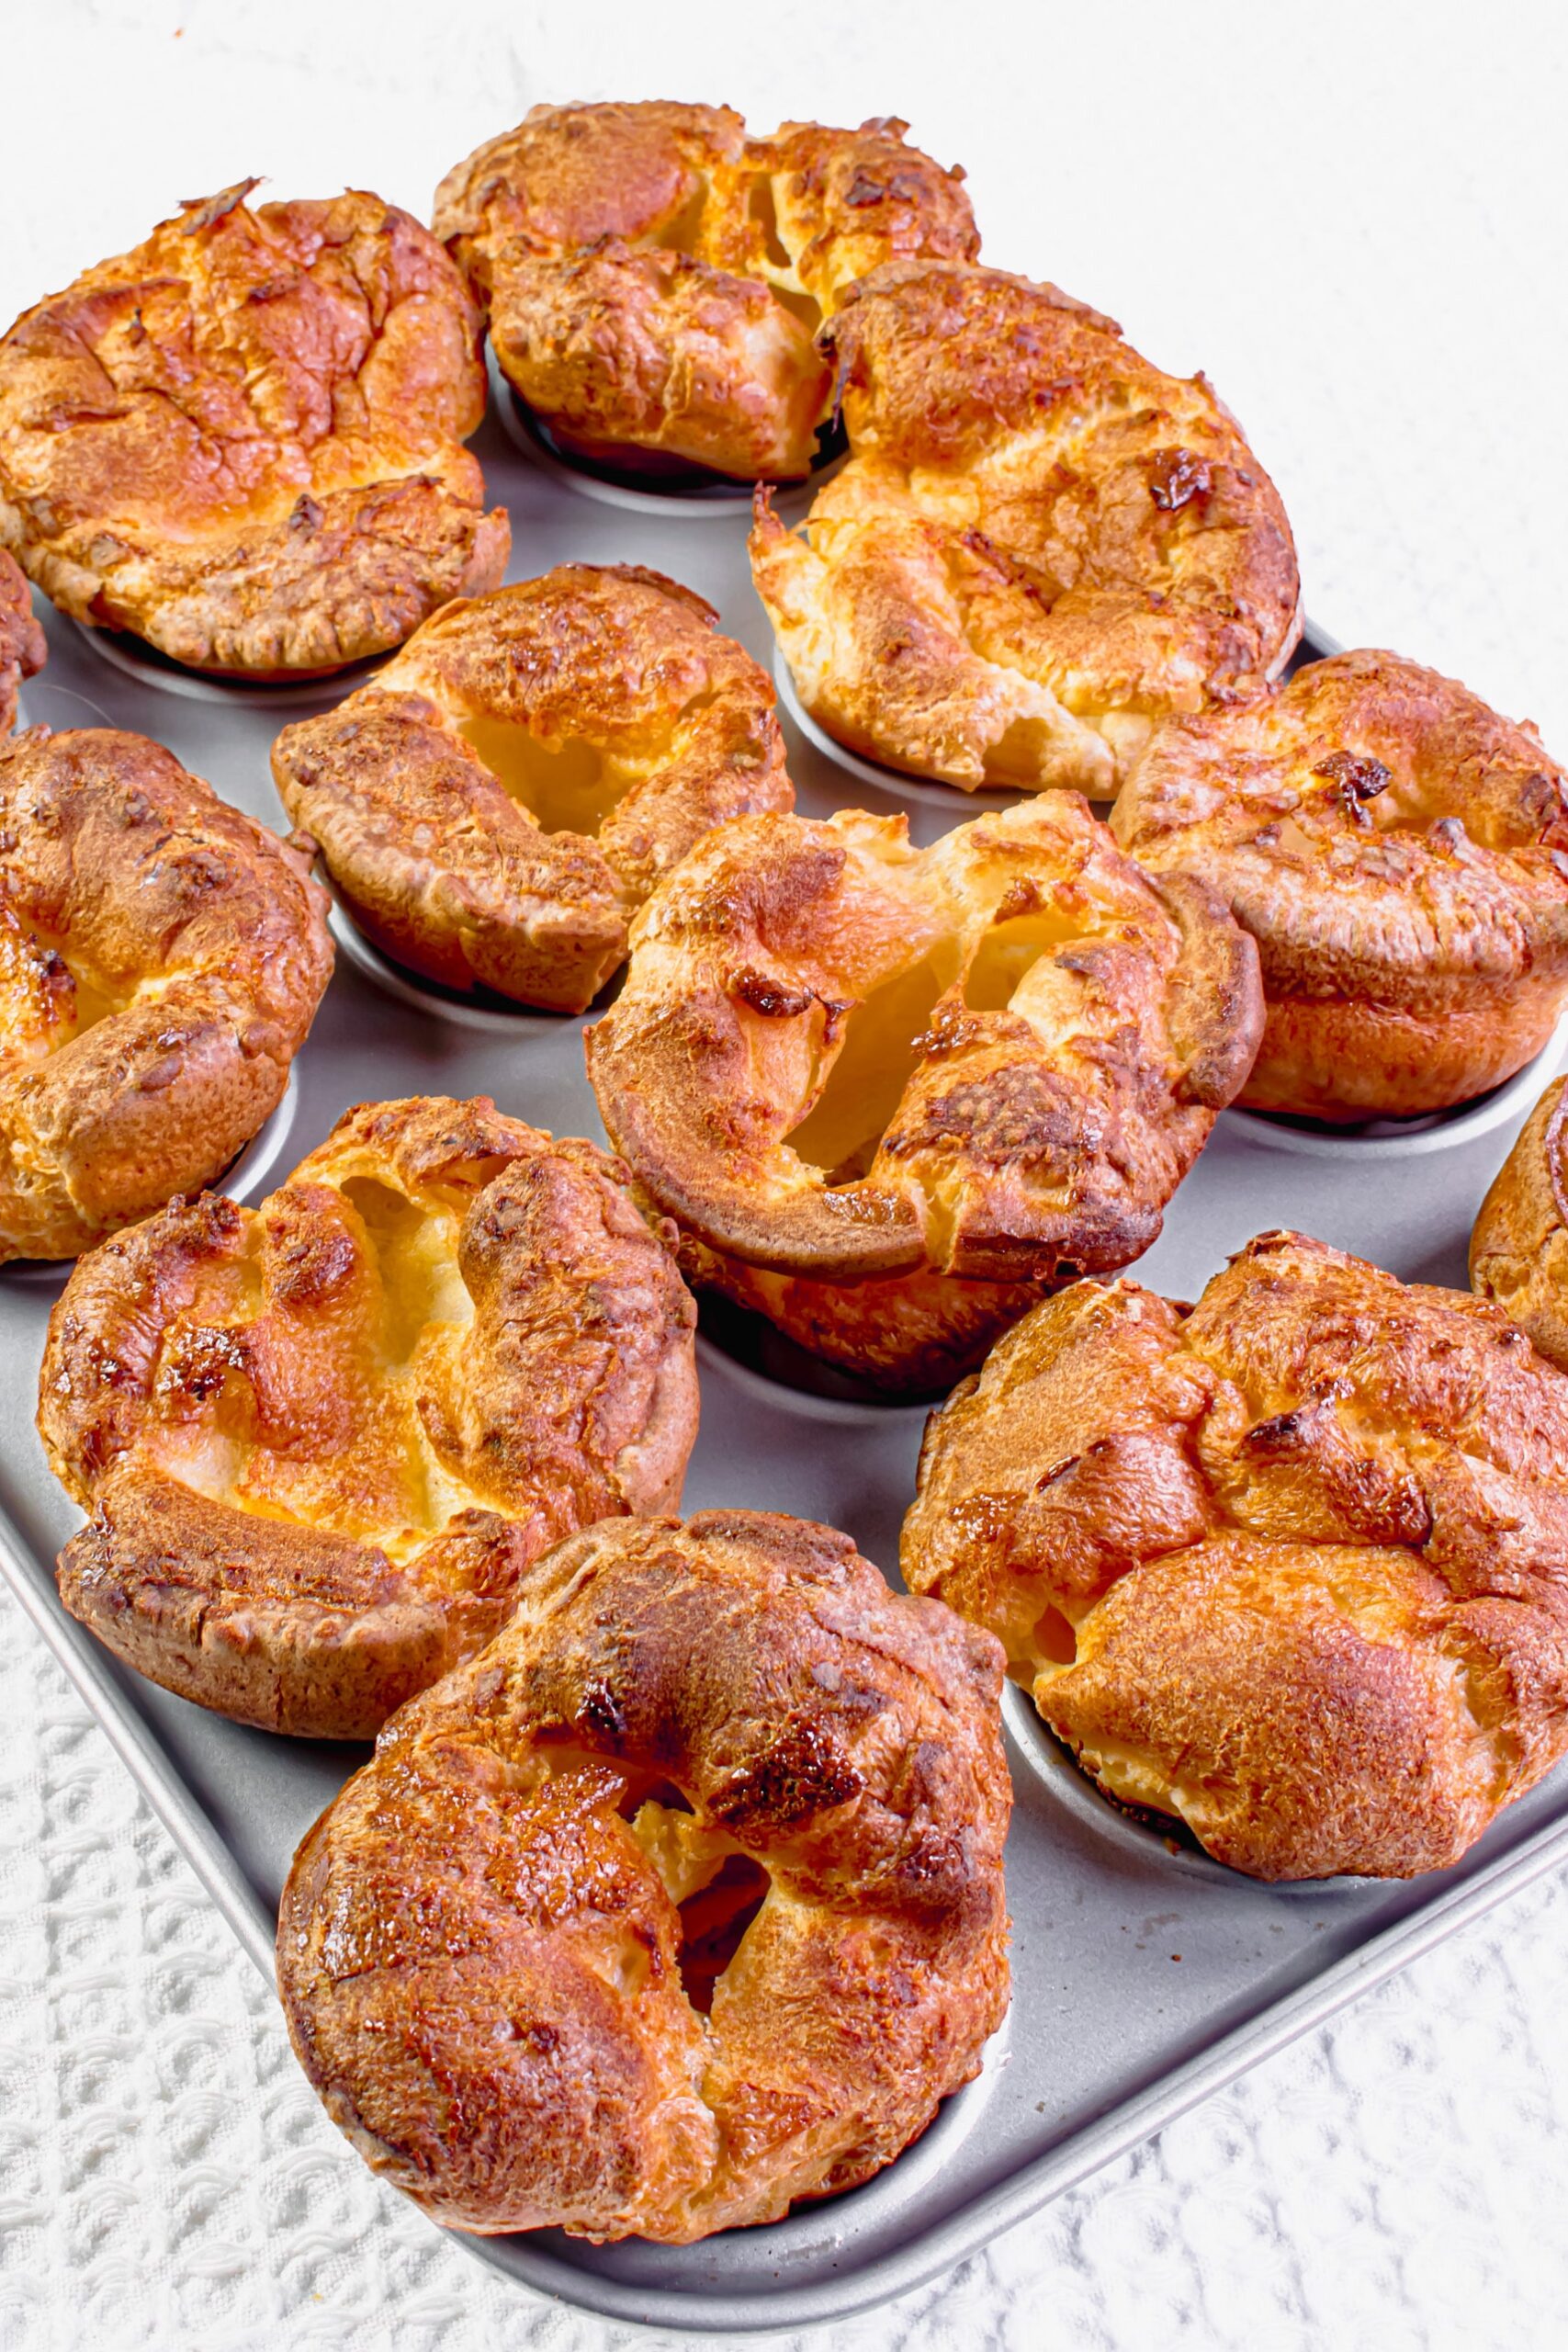 How to Make Yorkshire Puddings